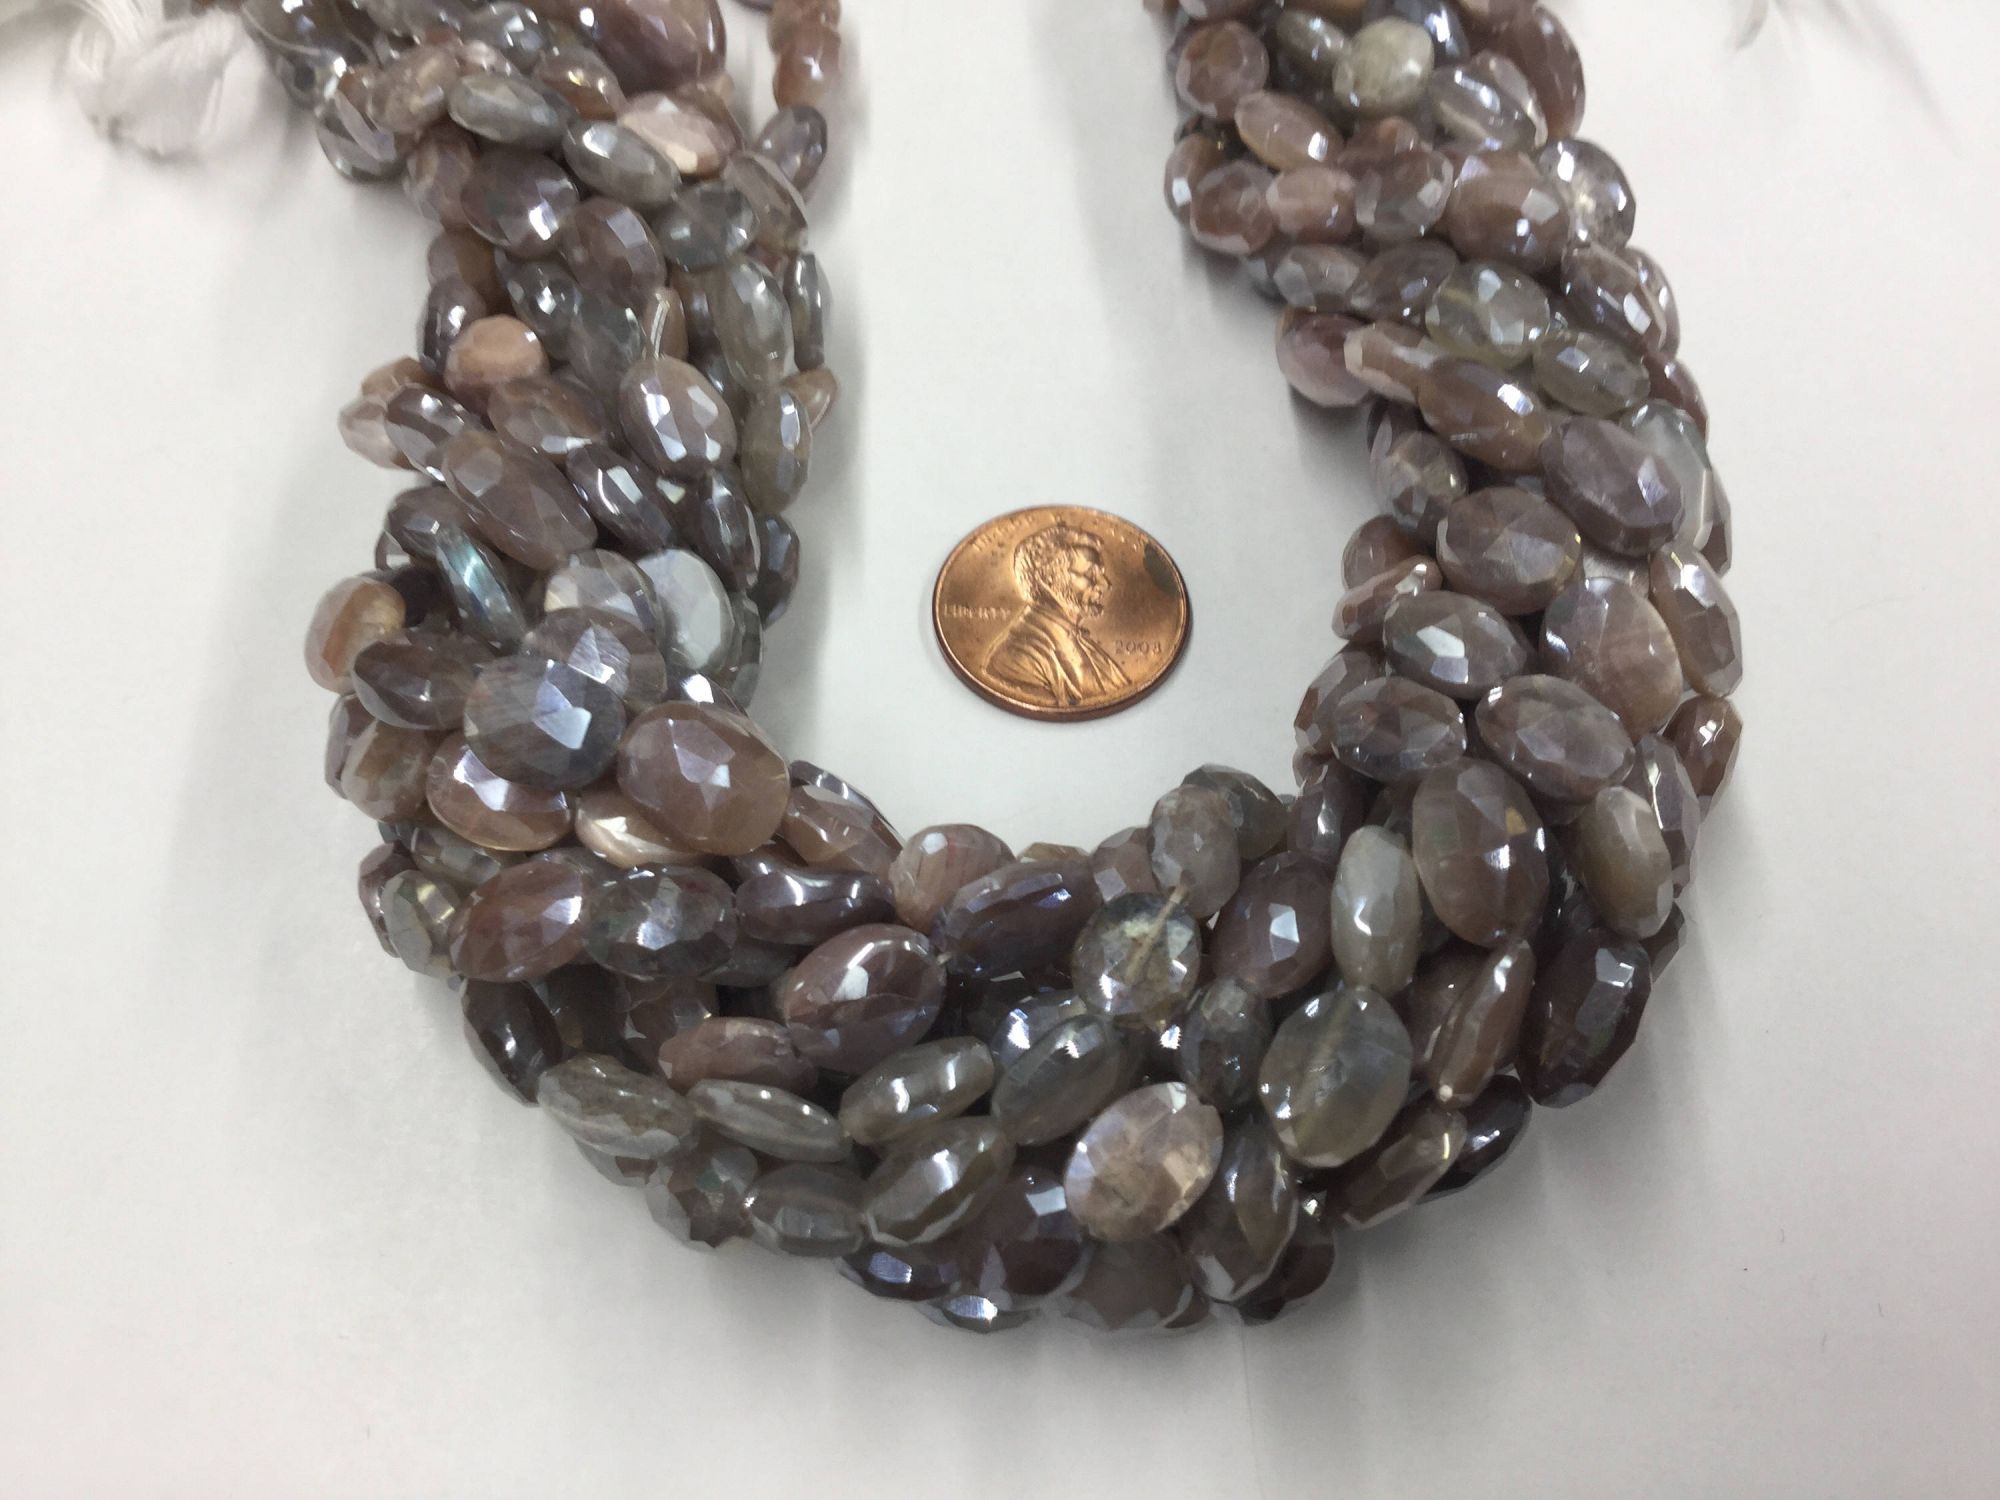 Chocolate-Cream Moonstone Ovals Faceted